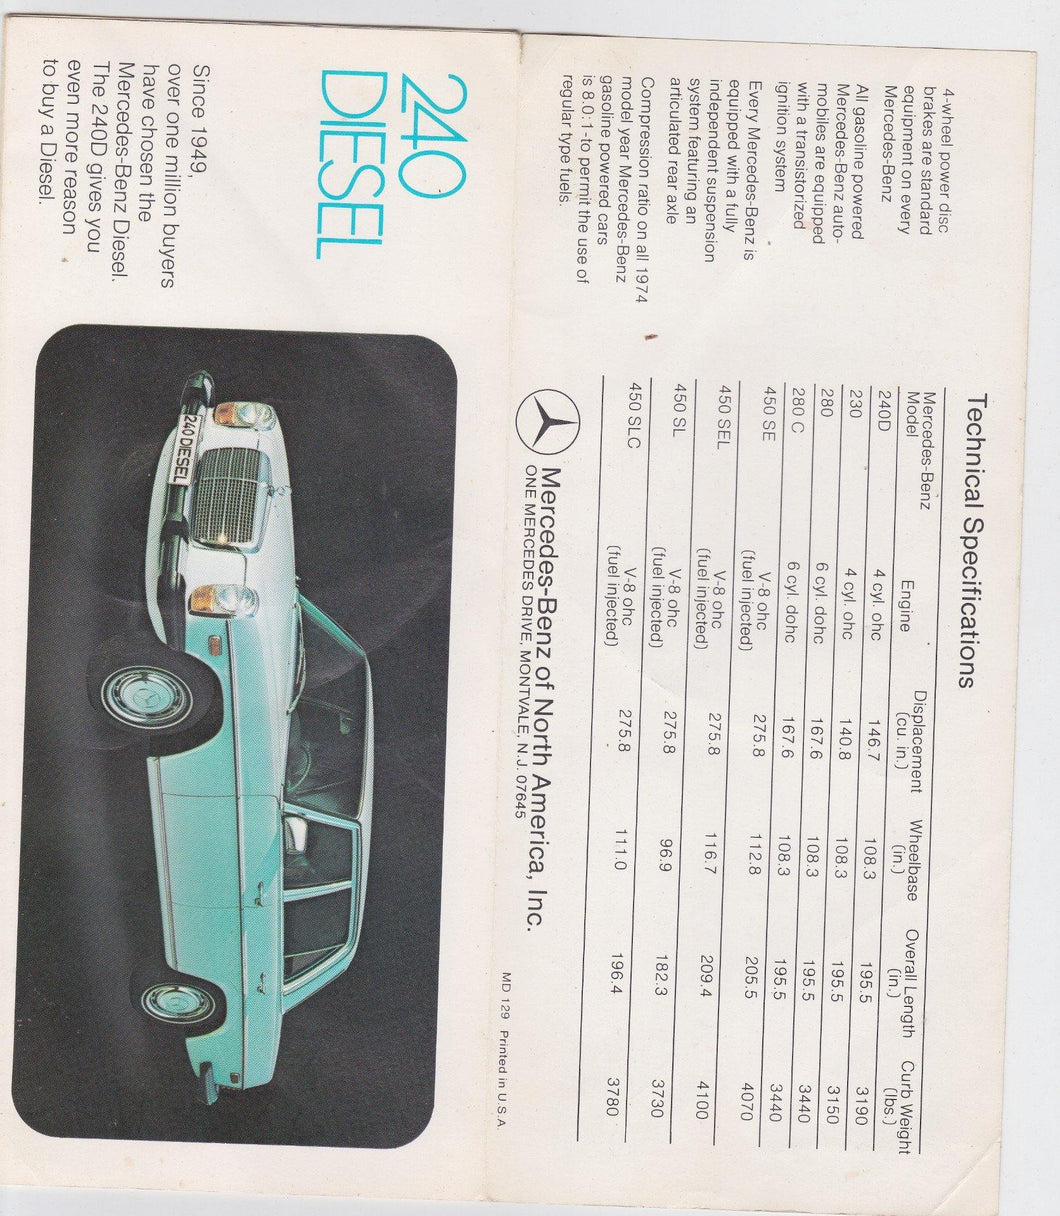 Mercedes-Benz of North America 1970's Foldout Brochure of All Models - TulipStuff